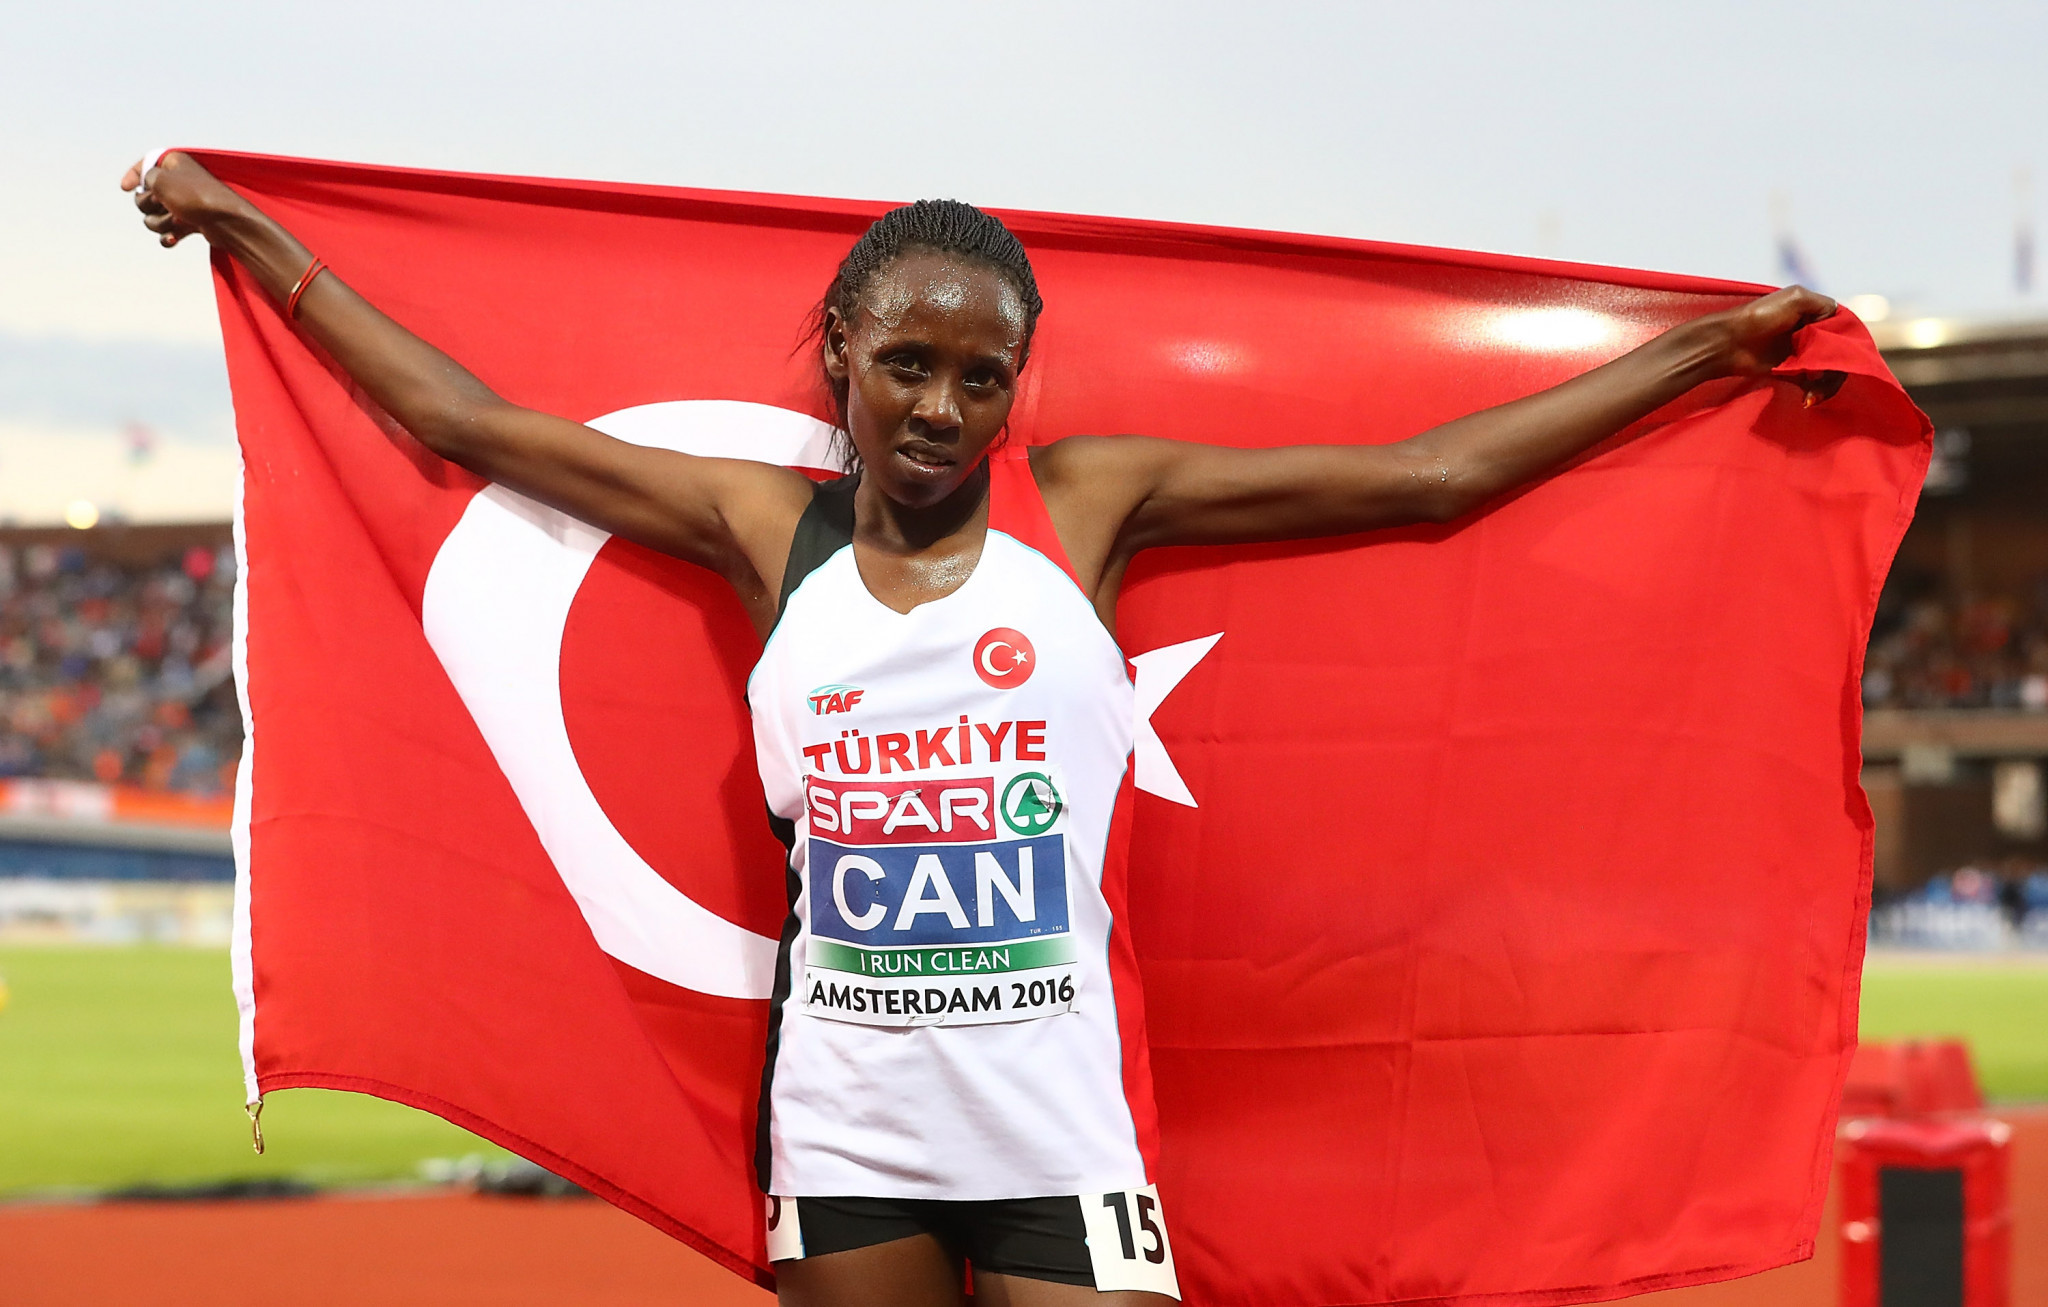 European 5,000m and 10,000m gold mdallist Yasemin Can competes for Turkey, although she continues to live and train in Kenya - the country she switched nationalities from ©Getty Images